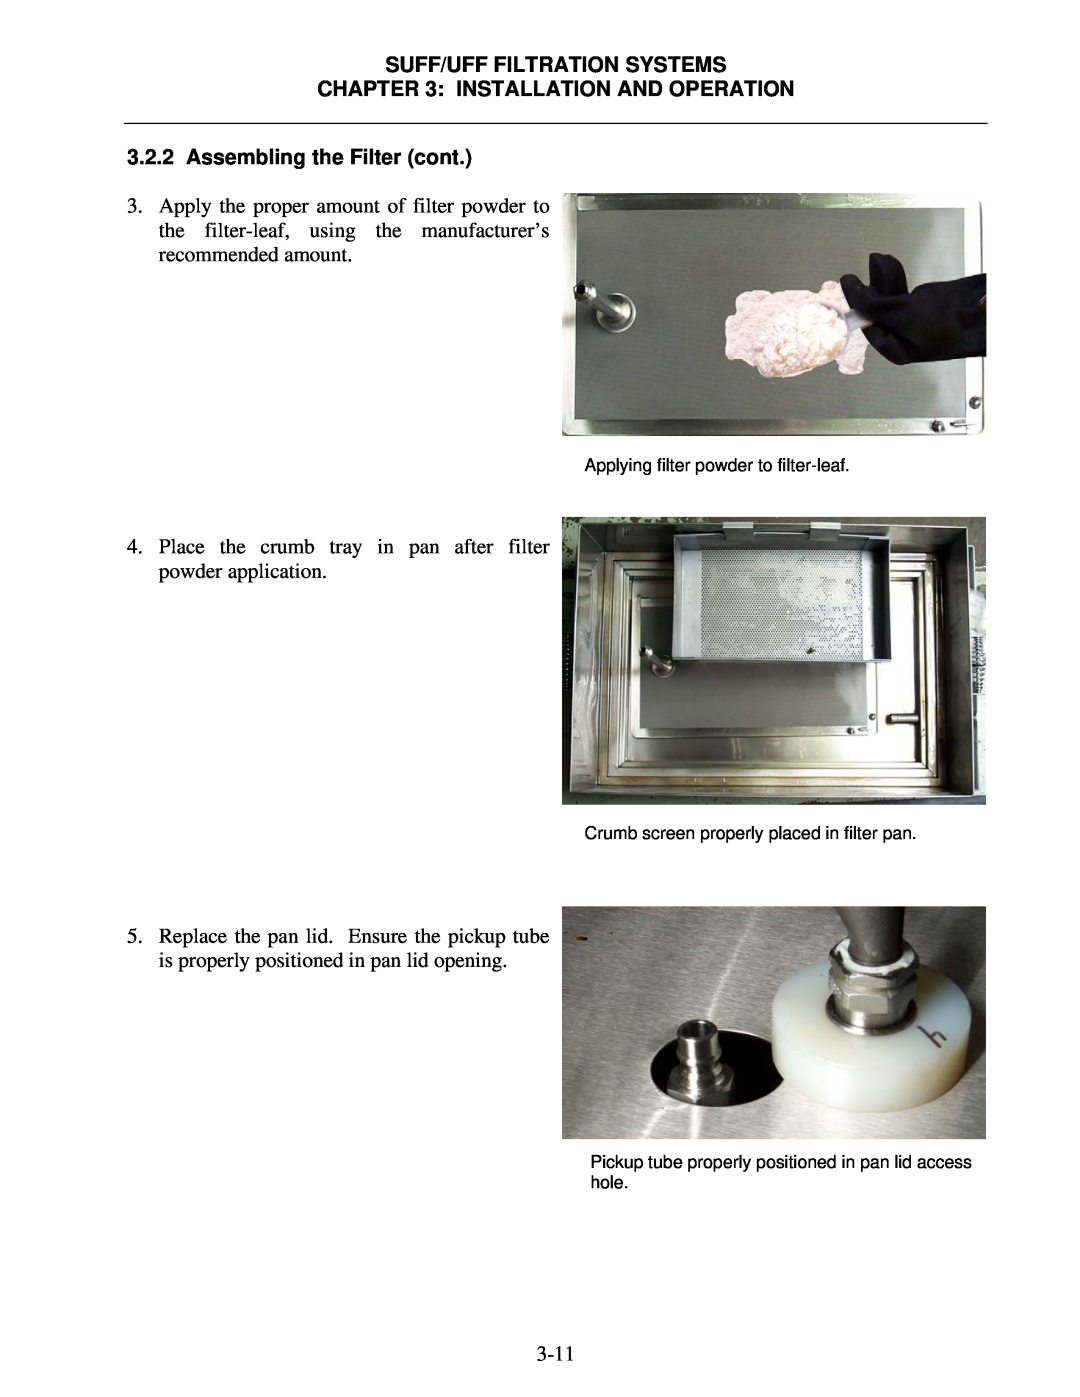 Frymaster Single Under Fryer Filter (SUFF) operation manual Suff/Uff Filtration Systems, Installation And Operation, 3-11 